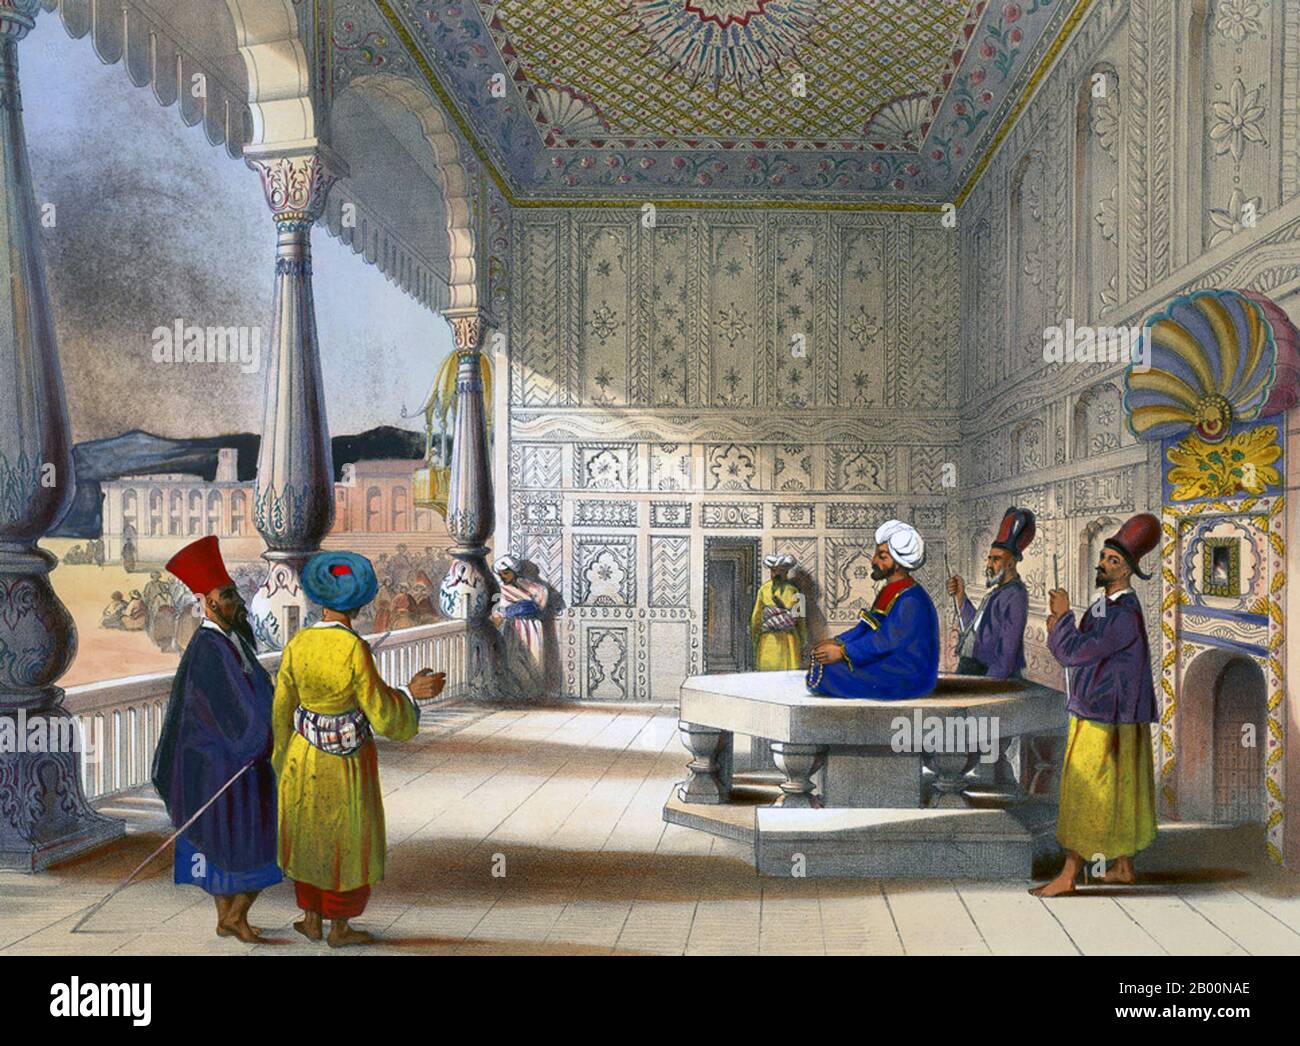 Afghanistan: 'Interior of the Palace of Shauh Shujah Ool Moolk, Late King of Caubul'. Lithograph plate 3 from 'Afghaunistan' by James Rattray (1818-1854), 1848.  Shuja Shah Durrani (also known as Shah Shujah, Shoja Shah, Shujah al-Mulk) (c. November 4, 1785 – April 5, 1842) was ruler of the Durrani Empire from 1803 to 1809. He then ruled from 1839 until his death in 1842. Shuja Shah was of the Sadozai line of the Abdali group of Pashtuns. He became the fifth Emir of Afghanistan. Stock Photo